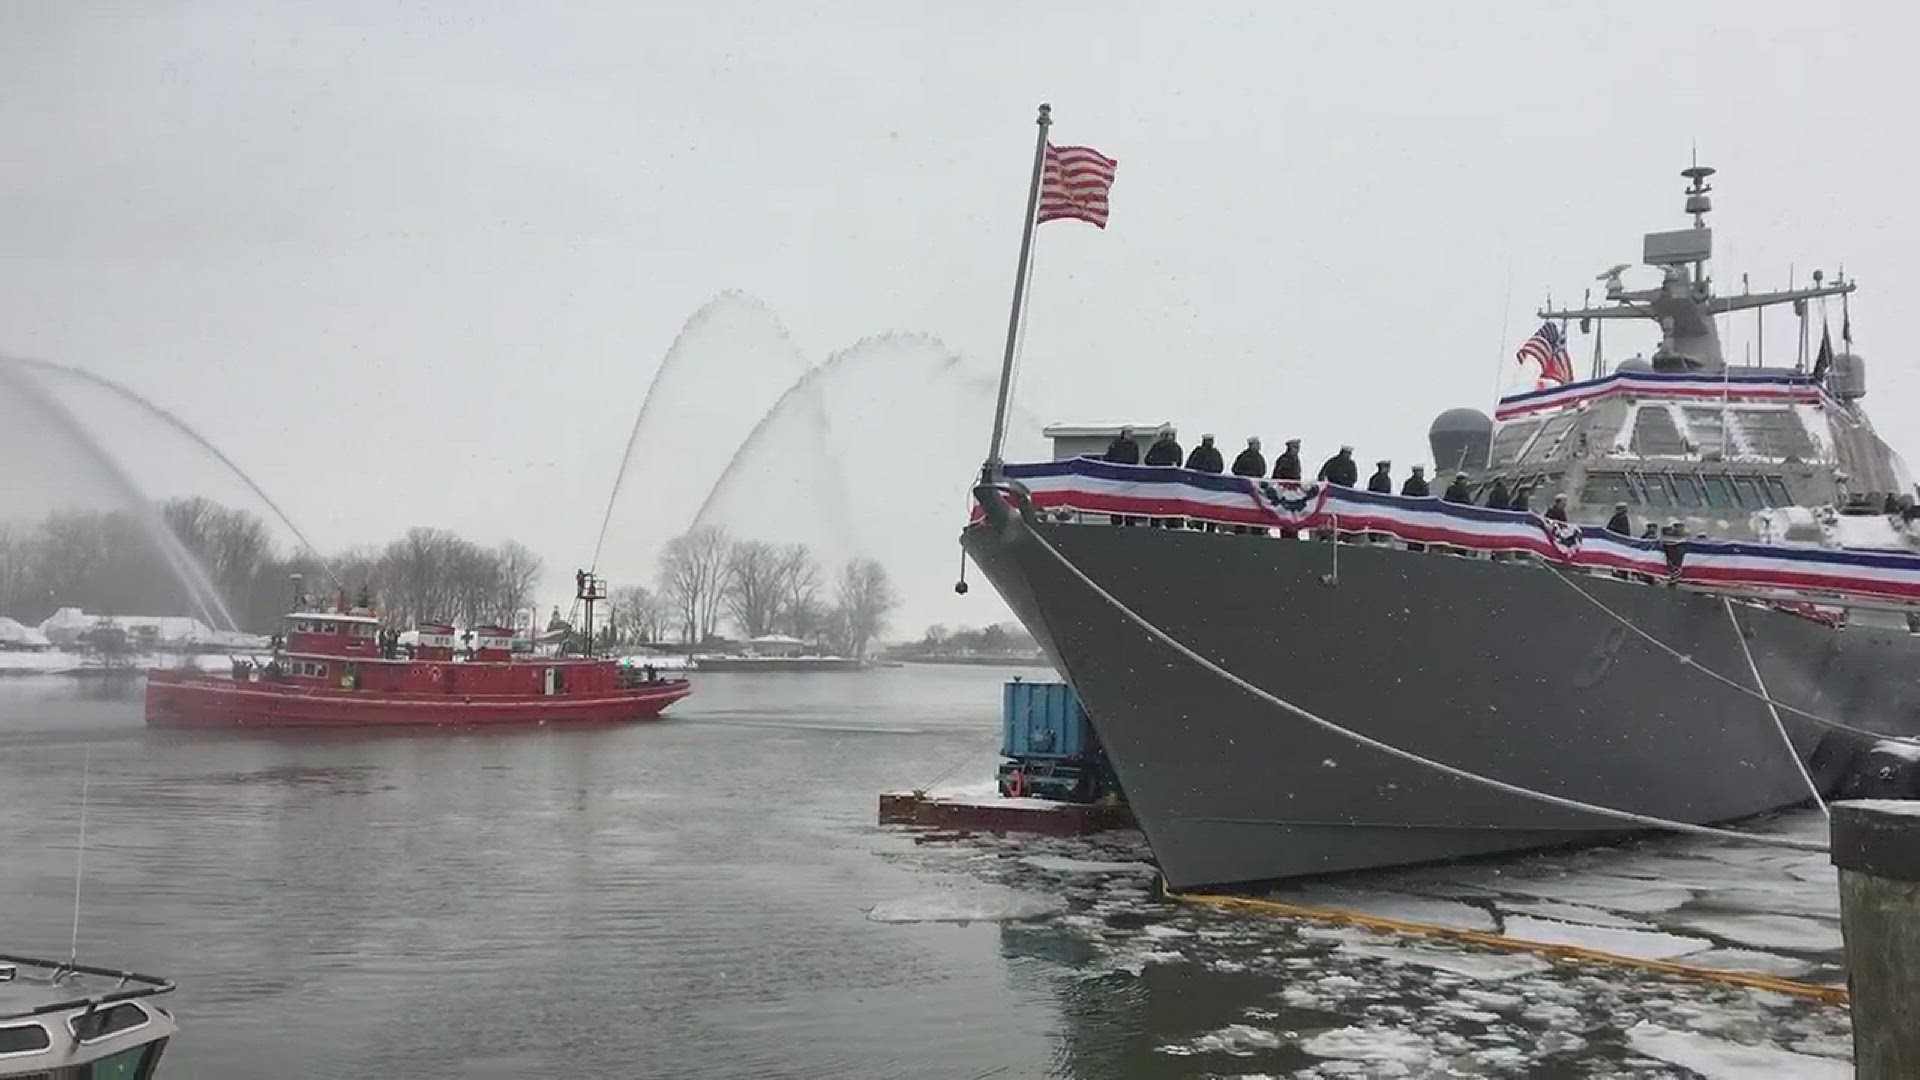 The Edward M. Cotter fire boat passes by the new USS Little Rock with a water cannon salute.